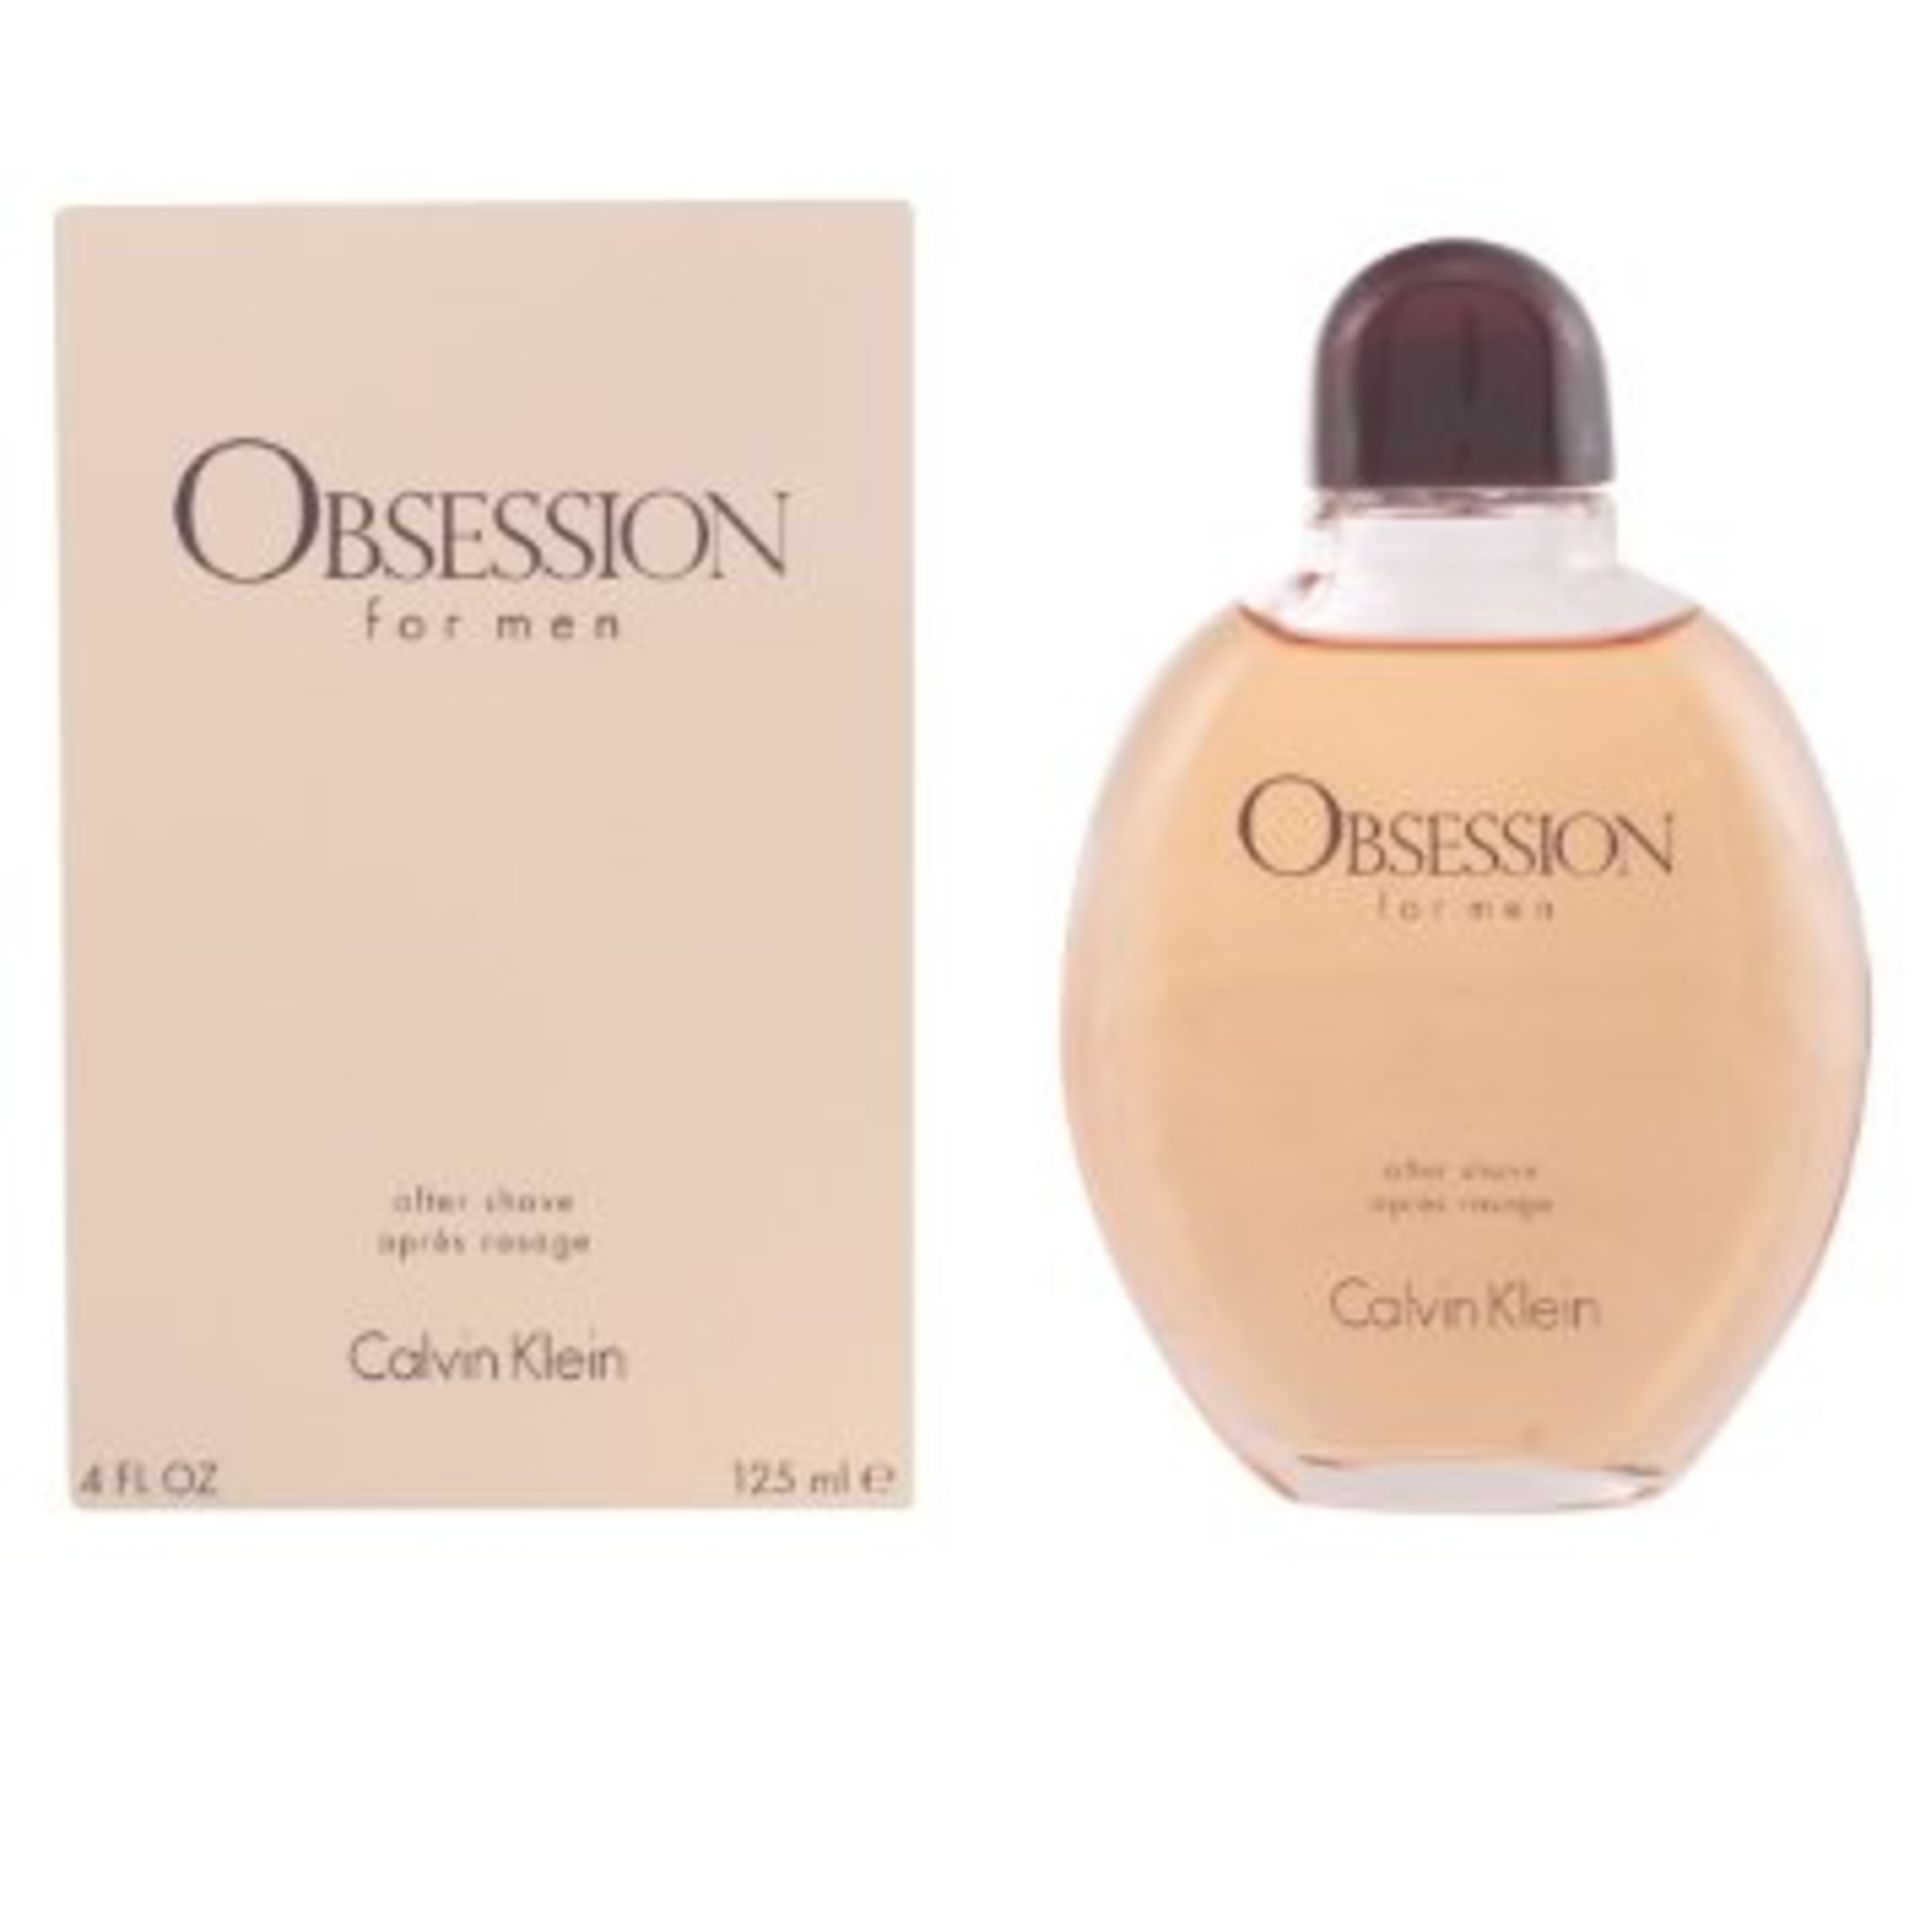 V Brand New Calvin Klein Obsession for Men 125 ml RRP £40 X 2 YOUR BID PRICE TO BE MULTIPLIED BY